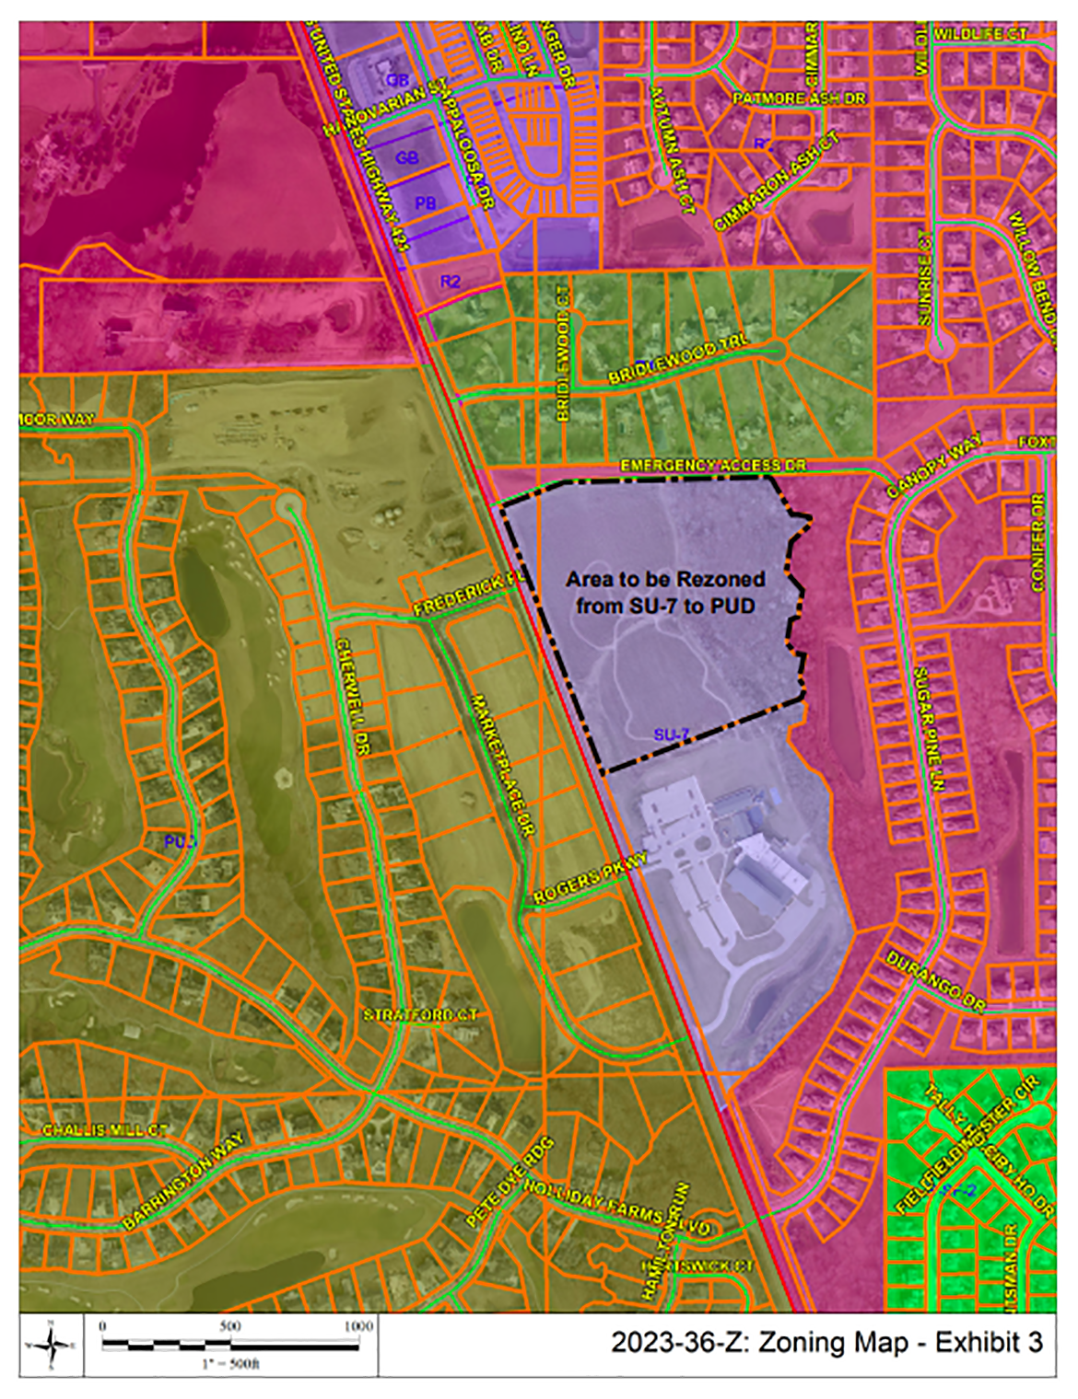 Zionsville Plan Commission votes in favor of rezoning